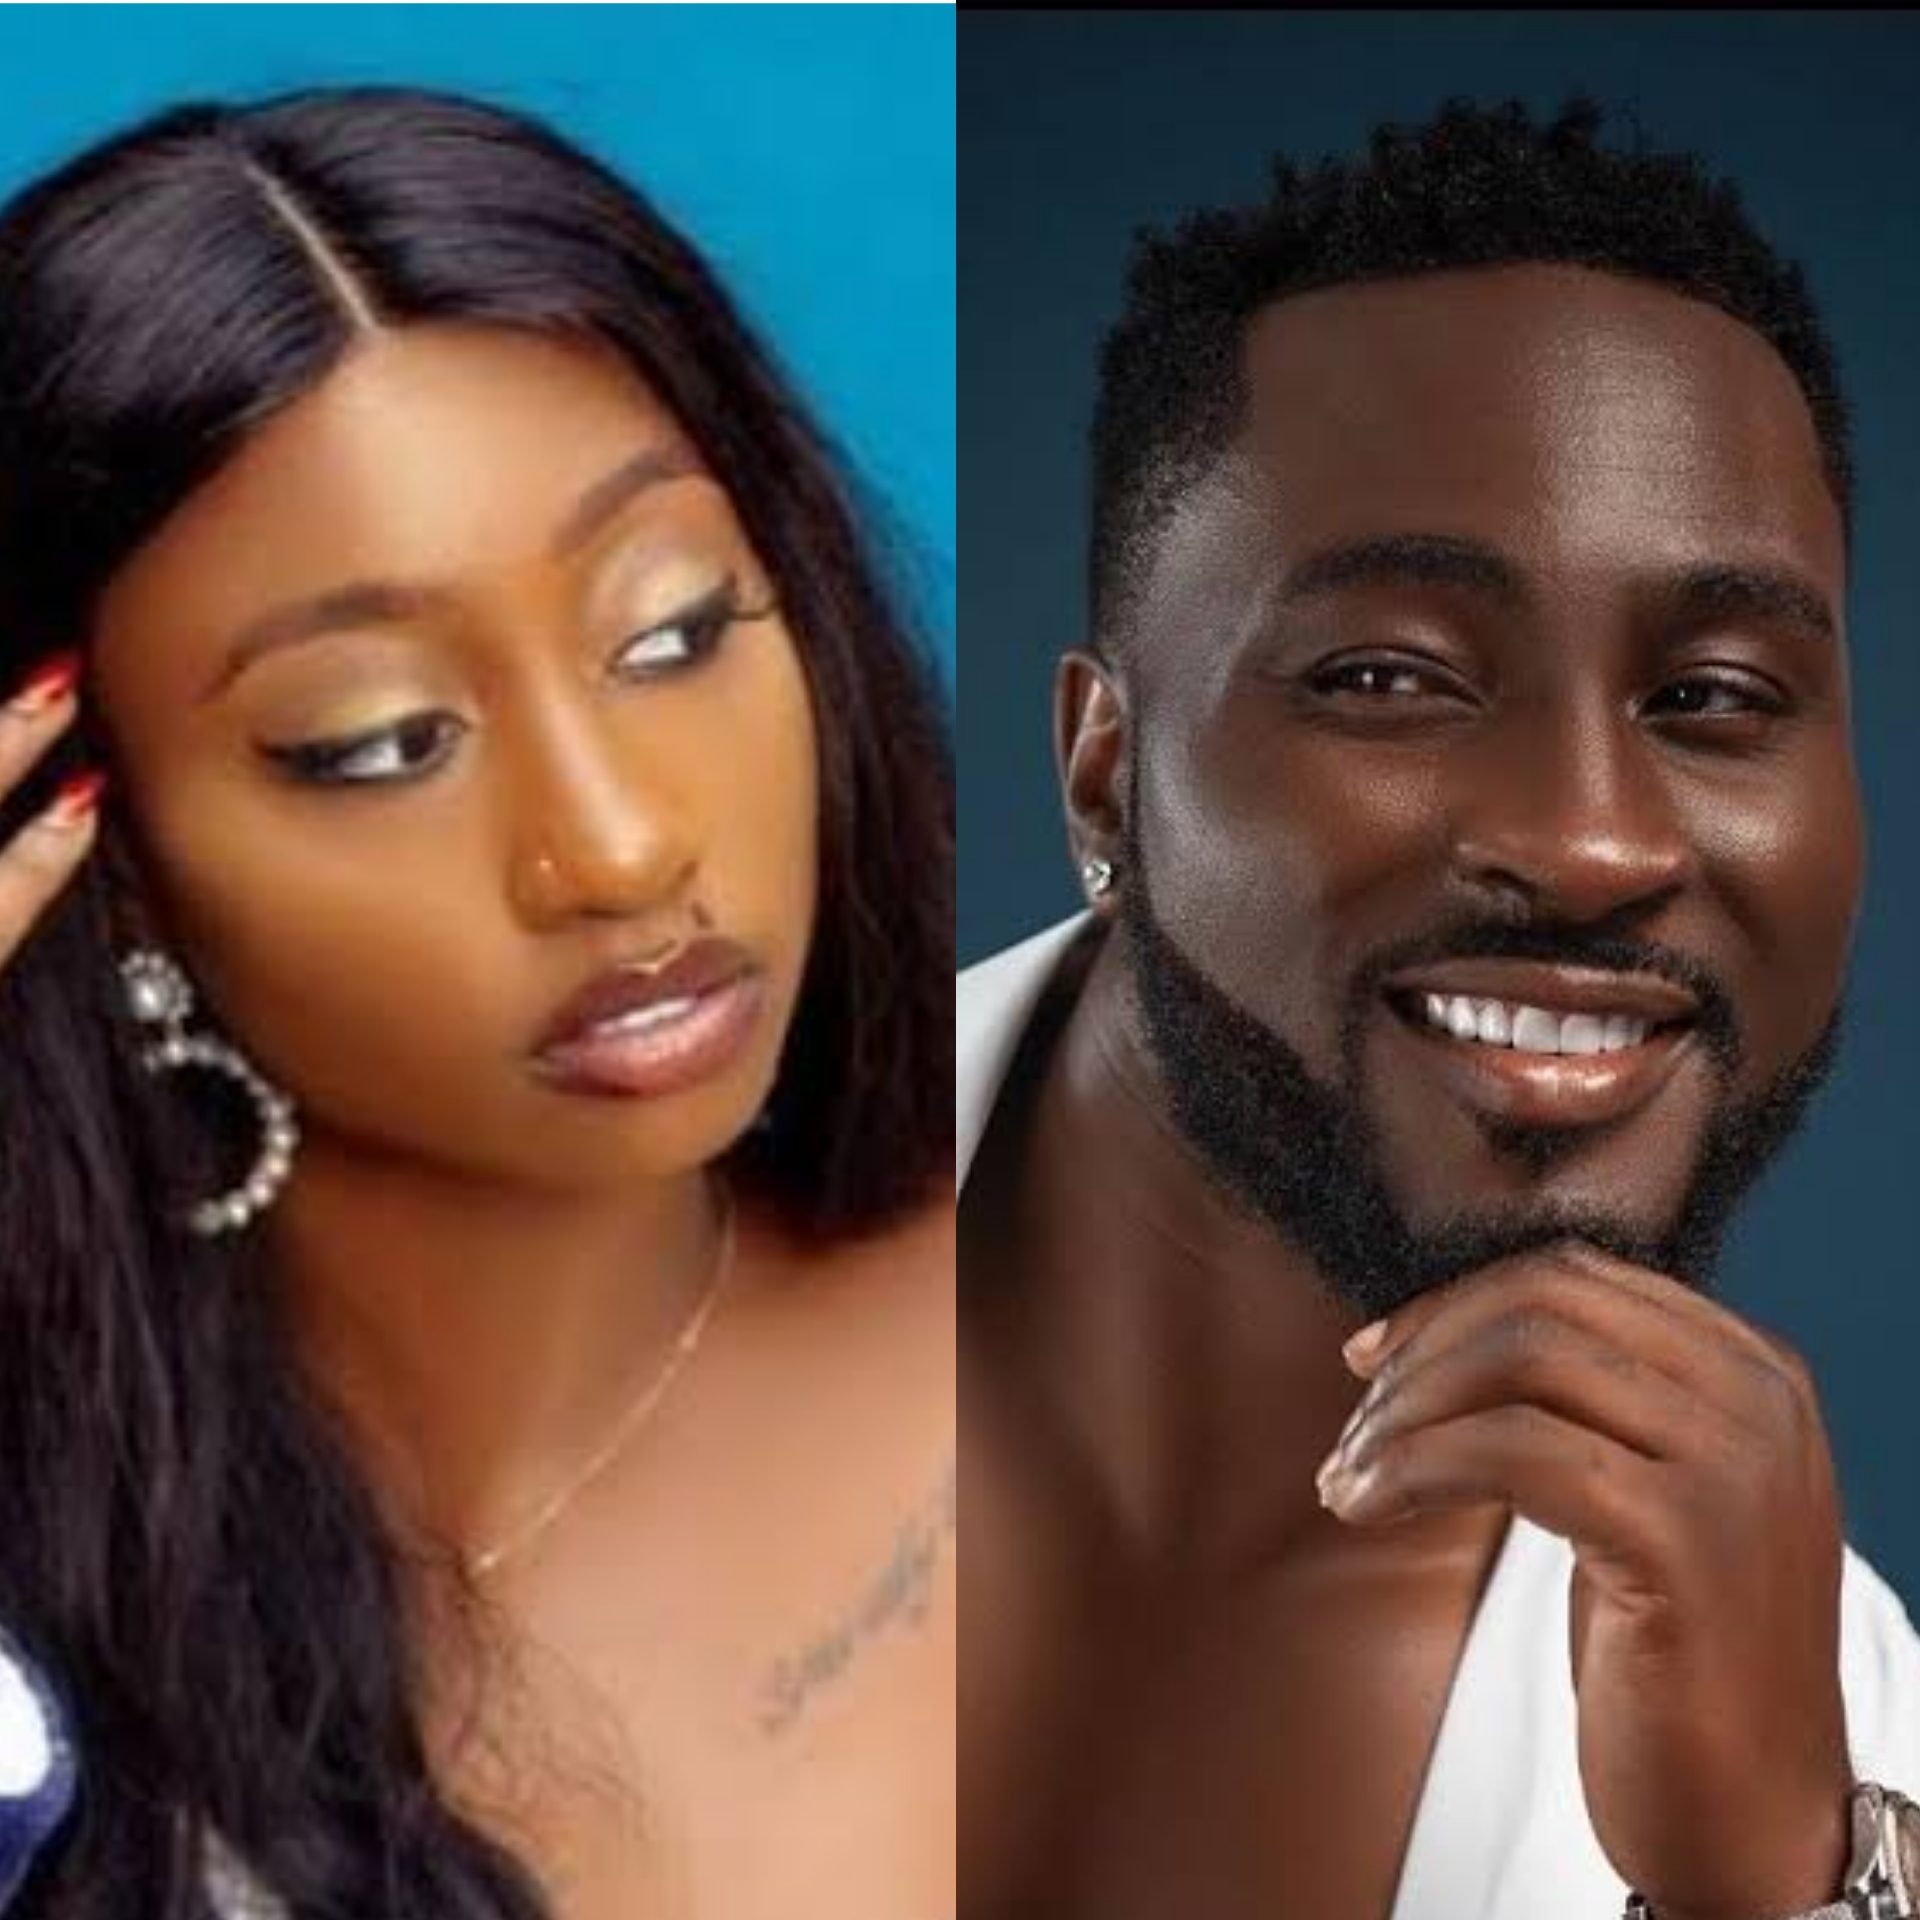 BBNaija All Stars House Erupts in Tensions: Pere’s Outburst Shakes Up the Atmosphere